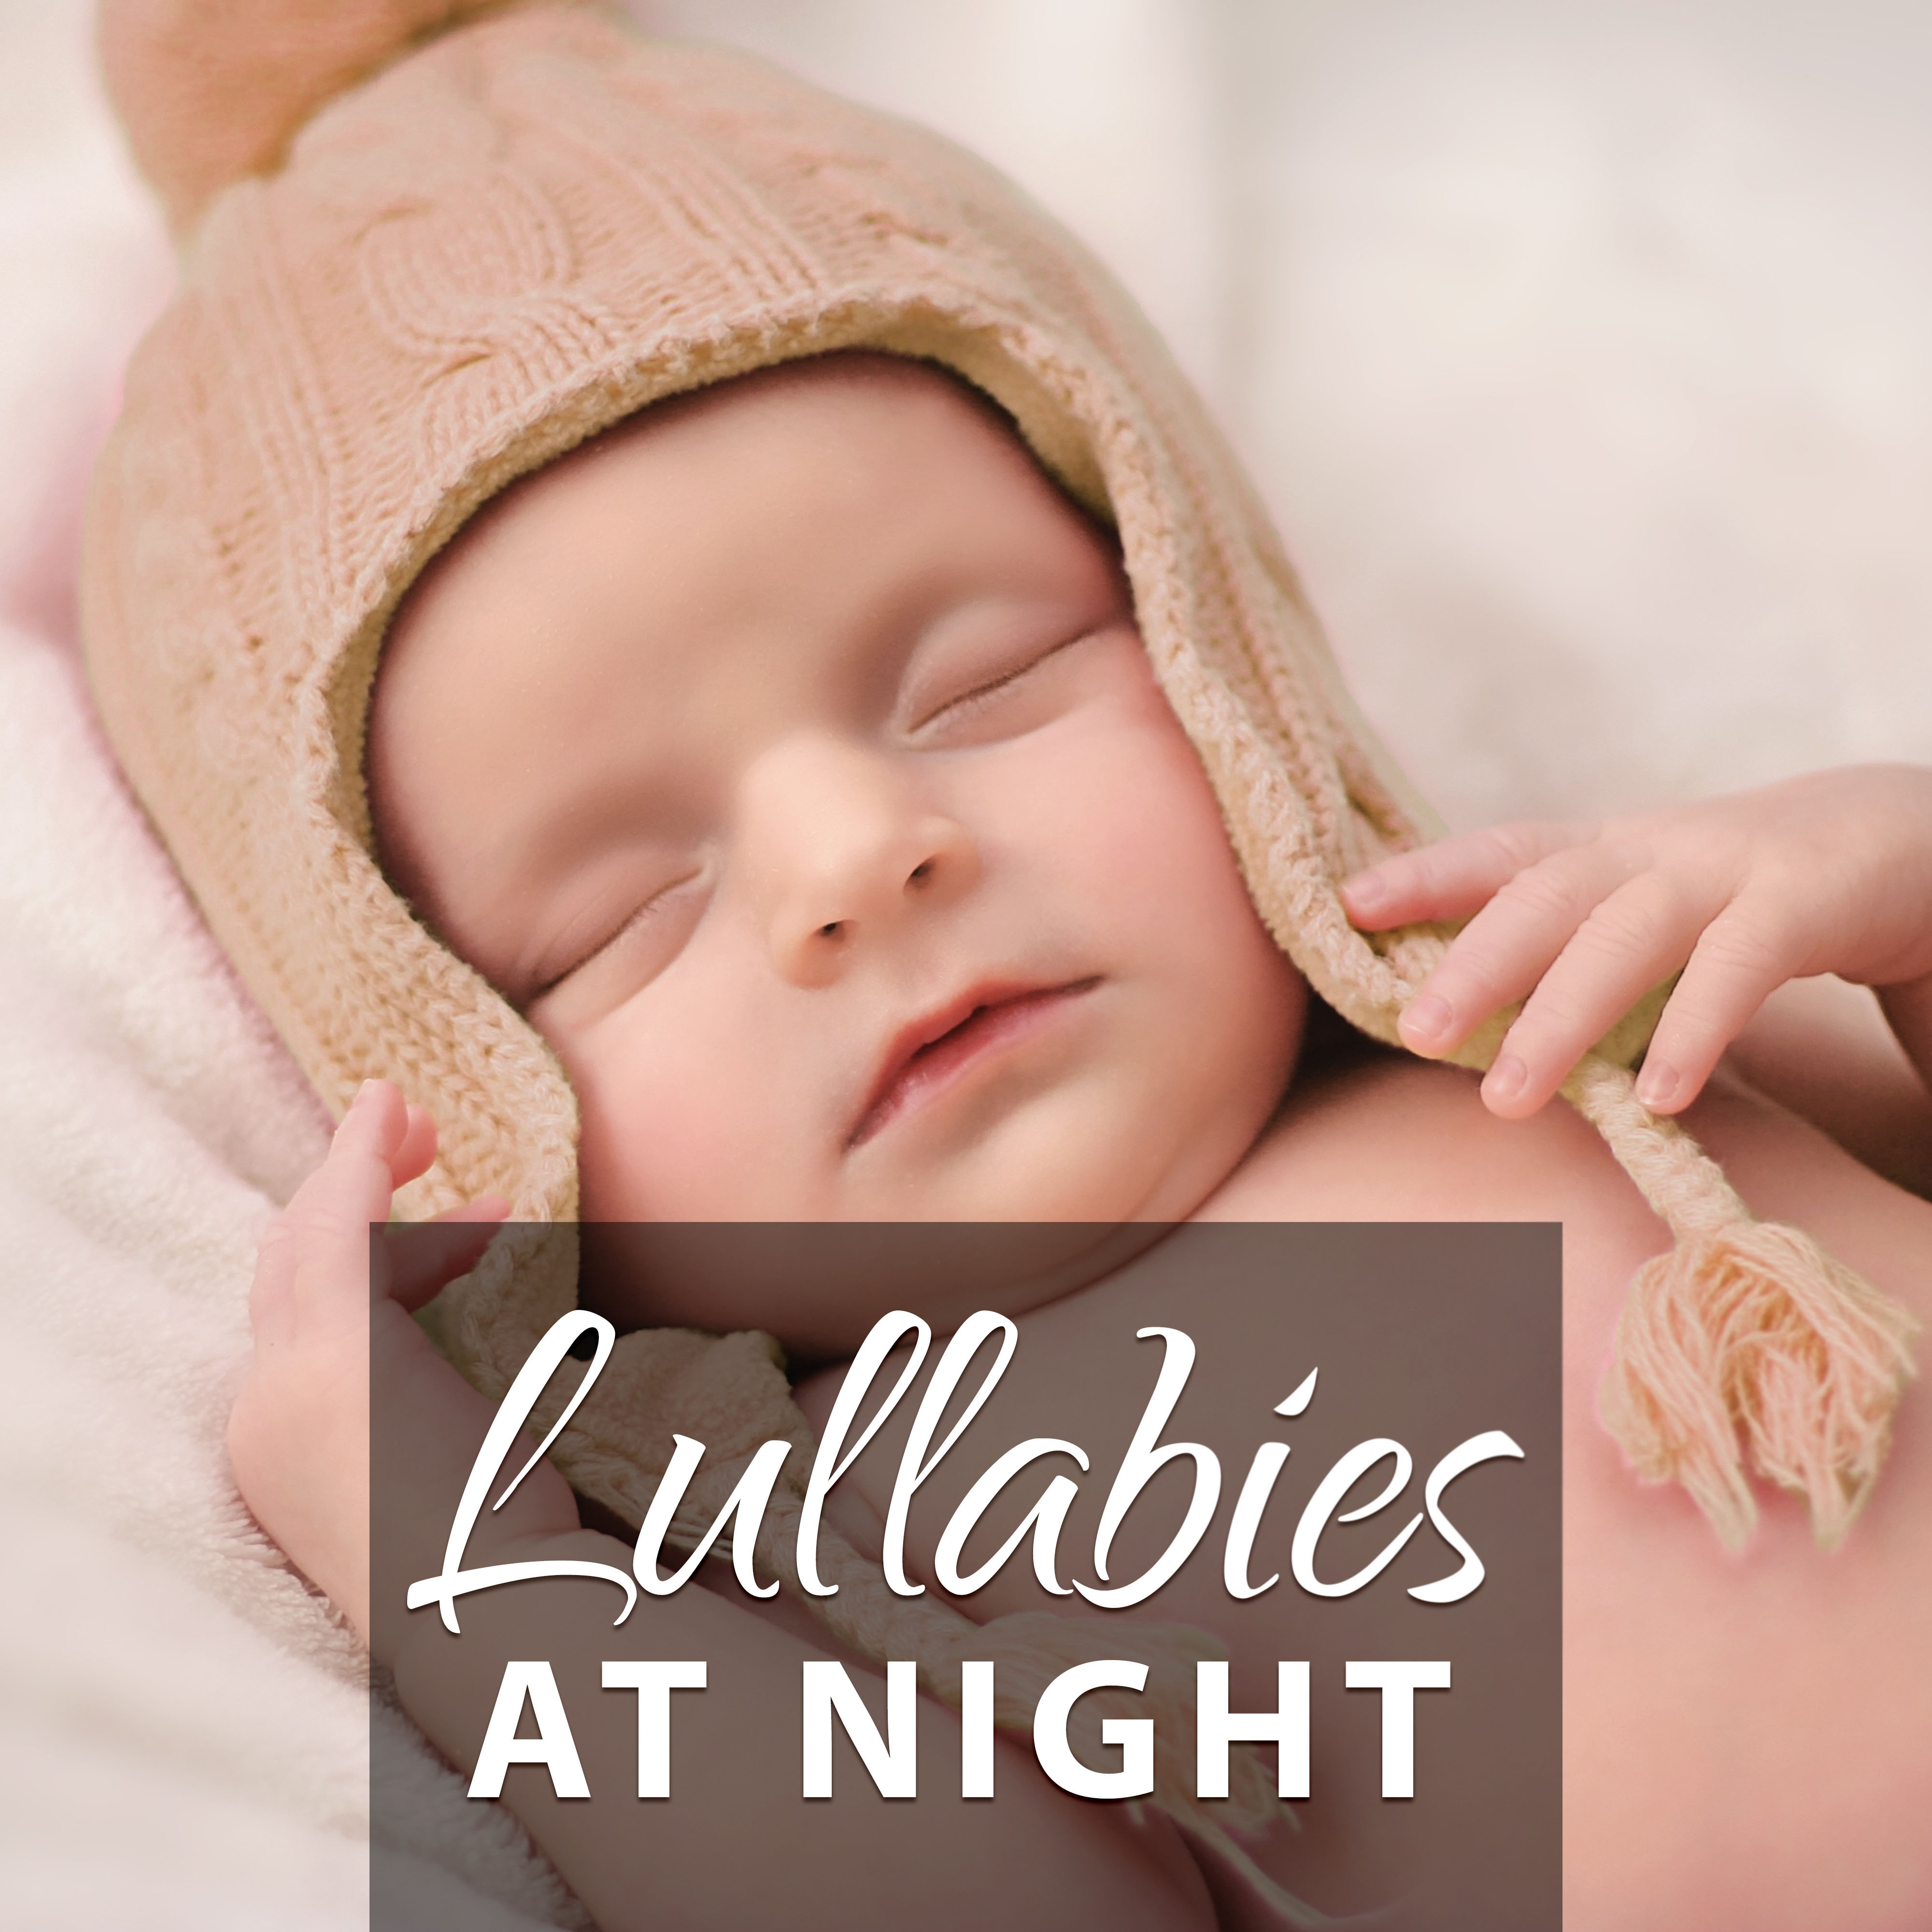 Lullabies at Night – Calm Classical Melodies, Lullabies for Little Baby, Sleeping Time, Schubert, Beethoven, Mozart